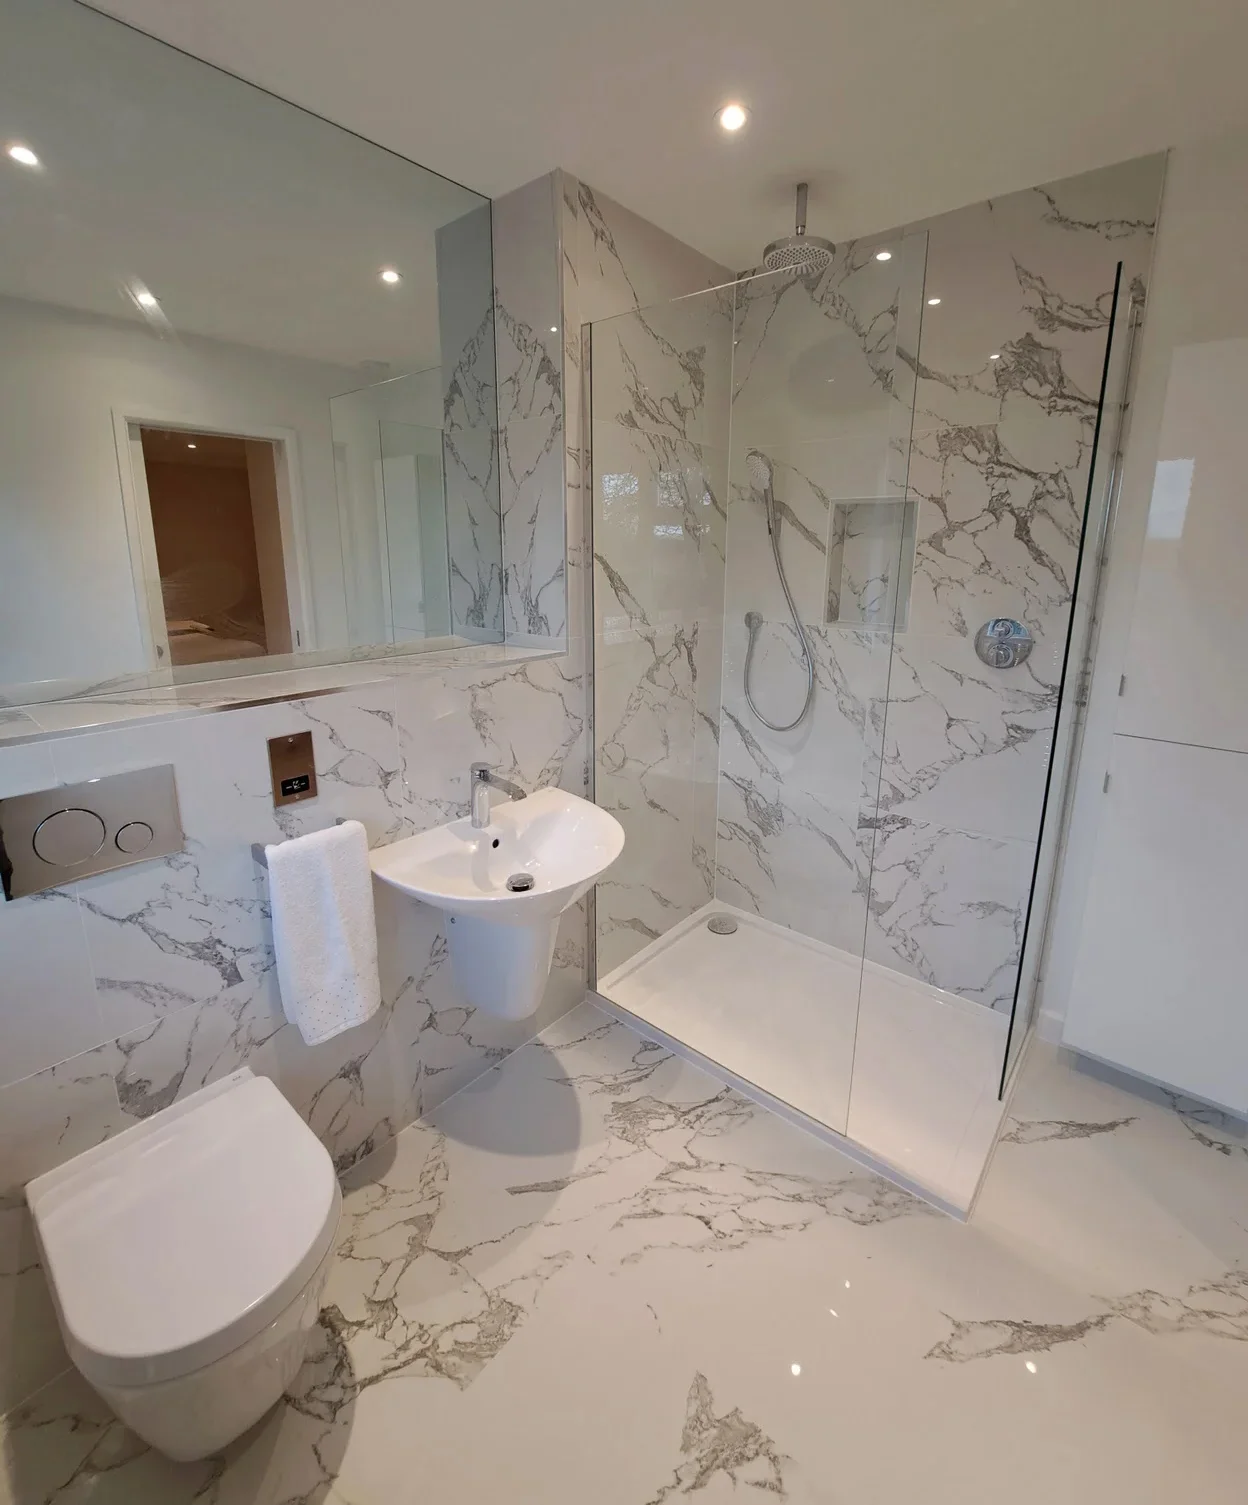 Kitchen fitters, Marlborough. An airy, light modern bathroom with marble affect walls and floors. For page: Testimonials, Bathroom & Kitchen Fitters Devizes and Marlborough